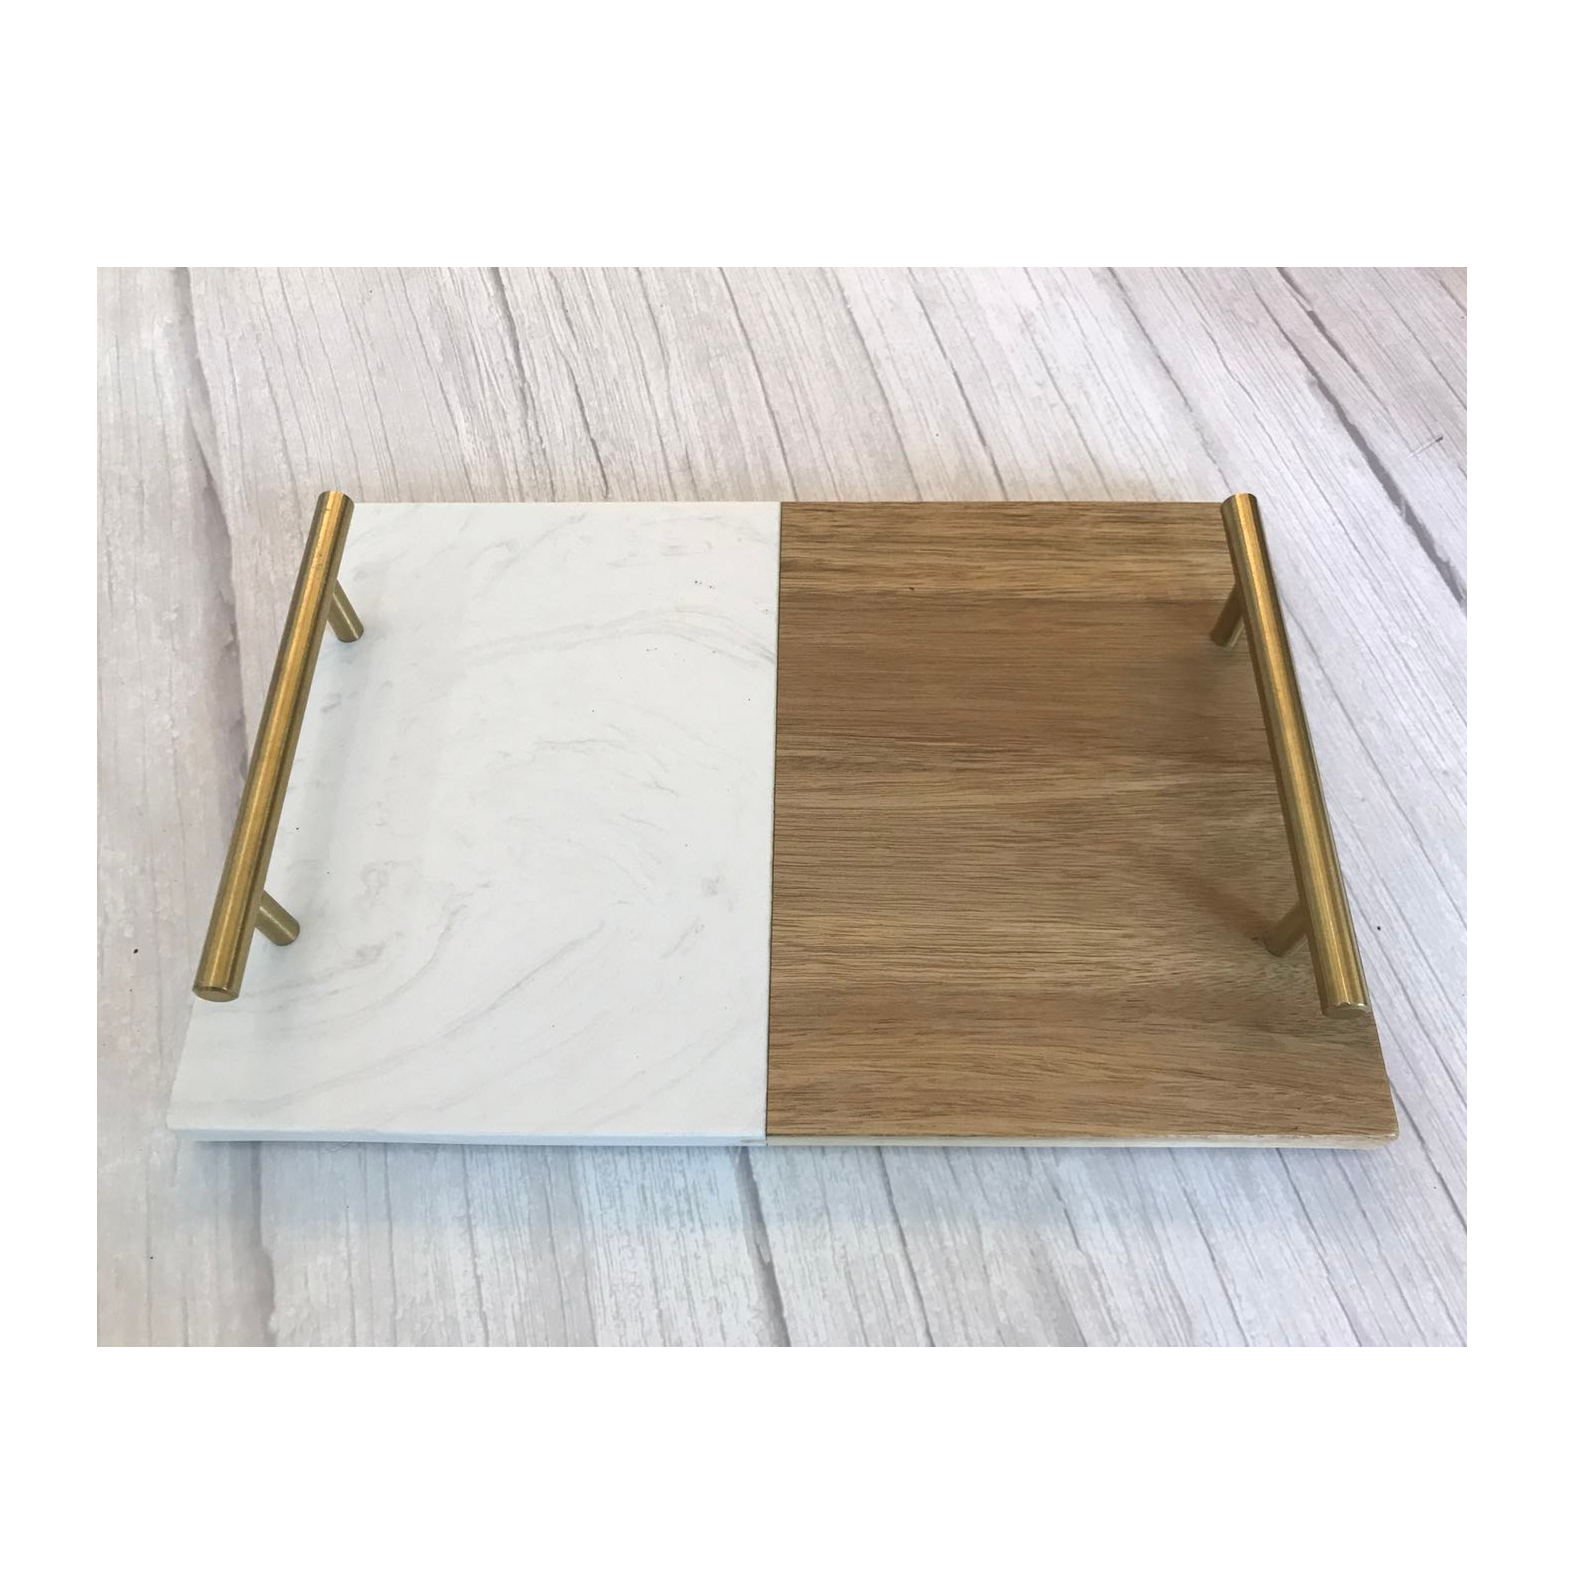 Elegant Decorative Stone Fruit Marble Serving Tray For Counter Vanity Dessert Nightstand Featured Image